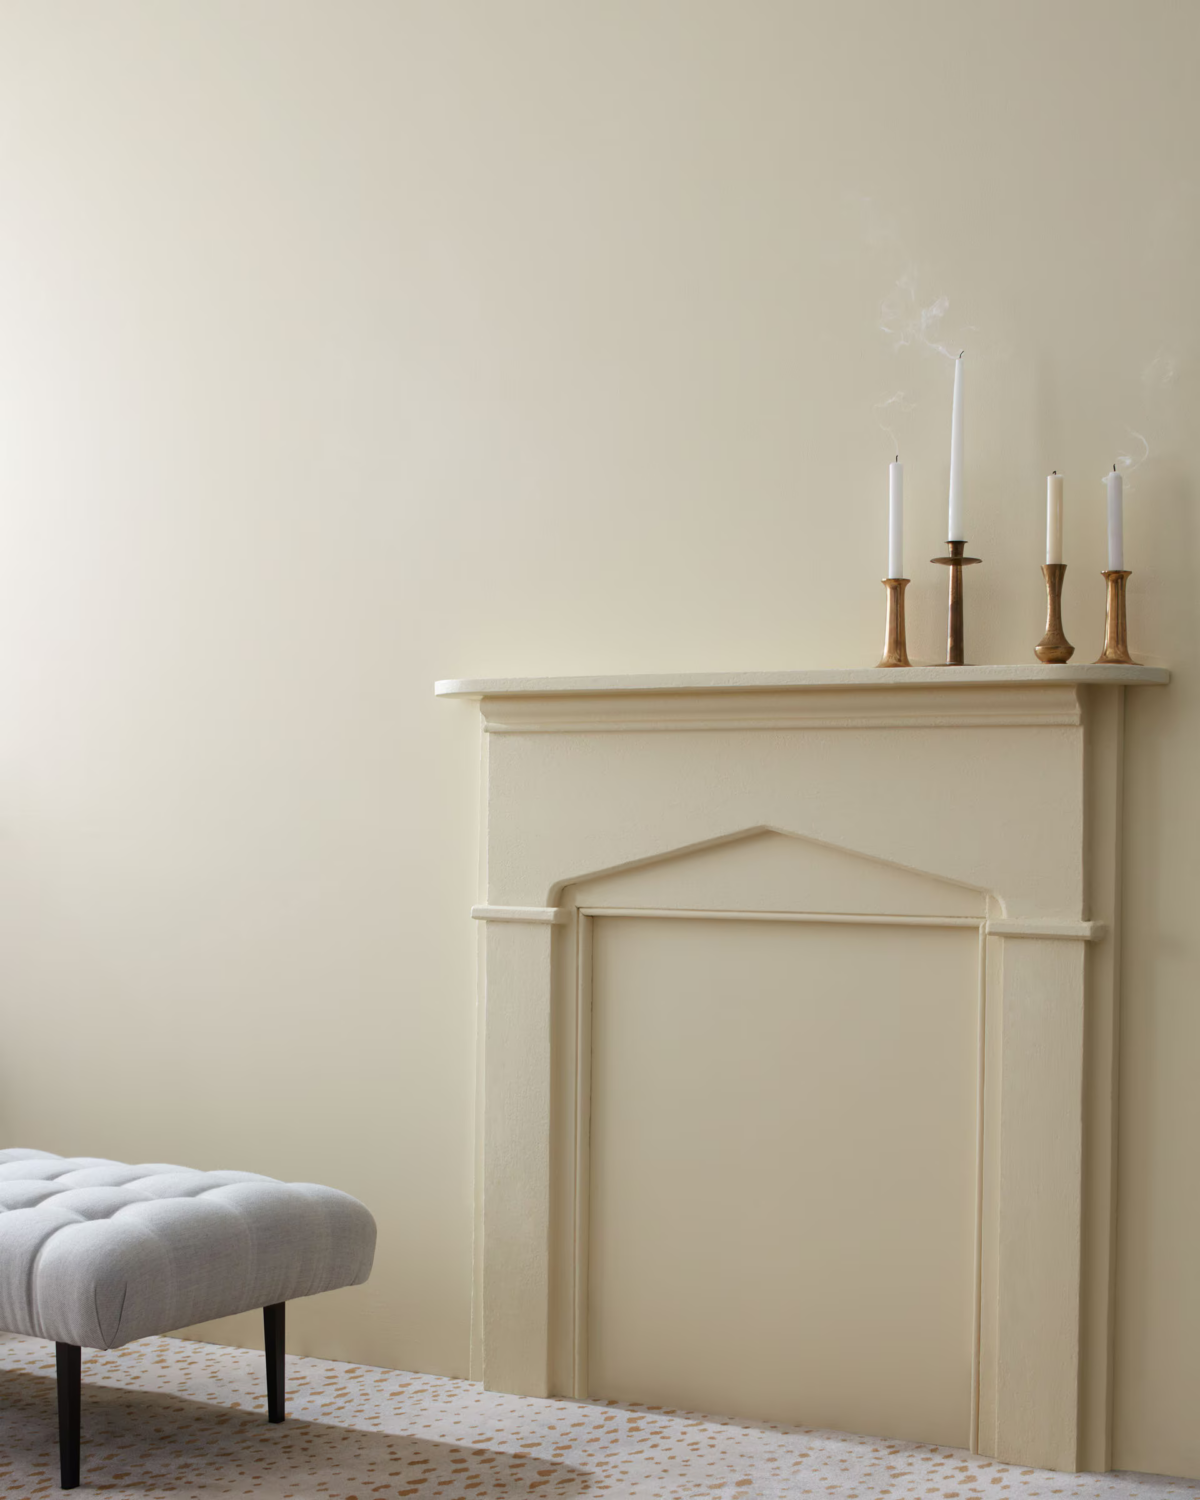 A beige fireplace mantel with three white candles in gold holders. Wall painted in Benjamin Moore Revere Pewter, is partially visible on the left side of the image. The floor has a light-colored, speckled pattern.